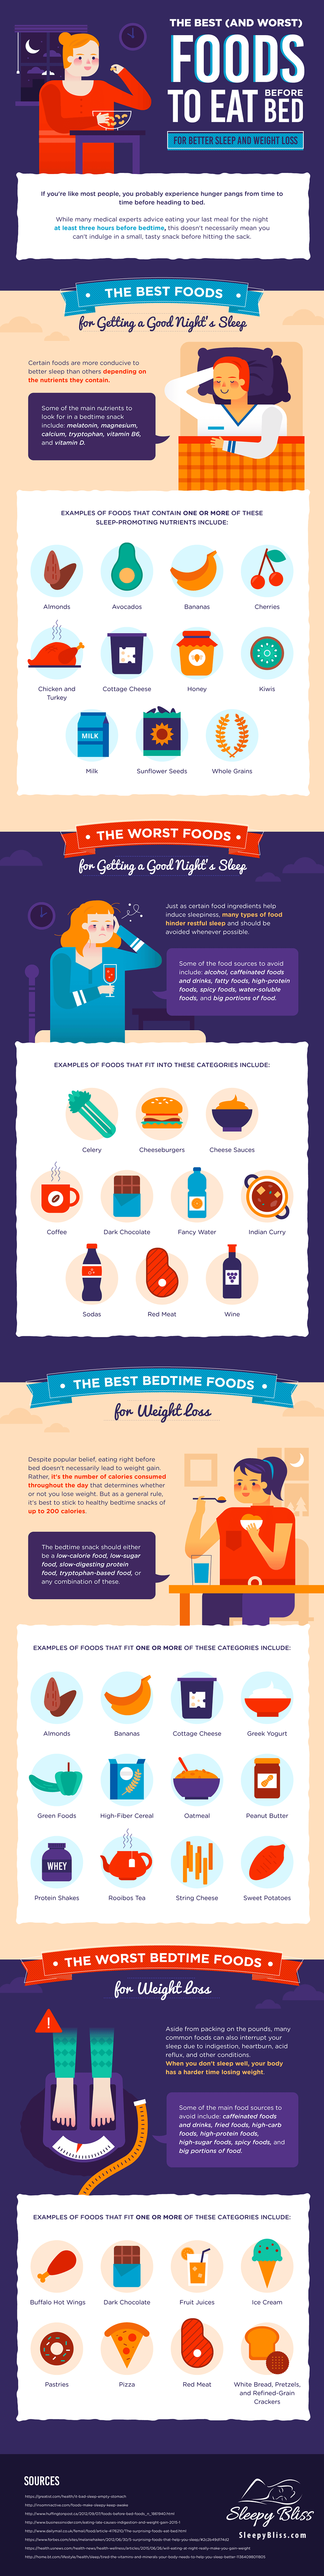 Best/Worst Foods to eat before Bed [Infographic] | ecogreenlove